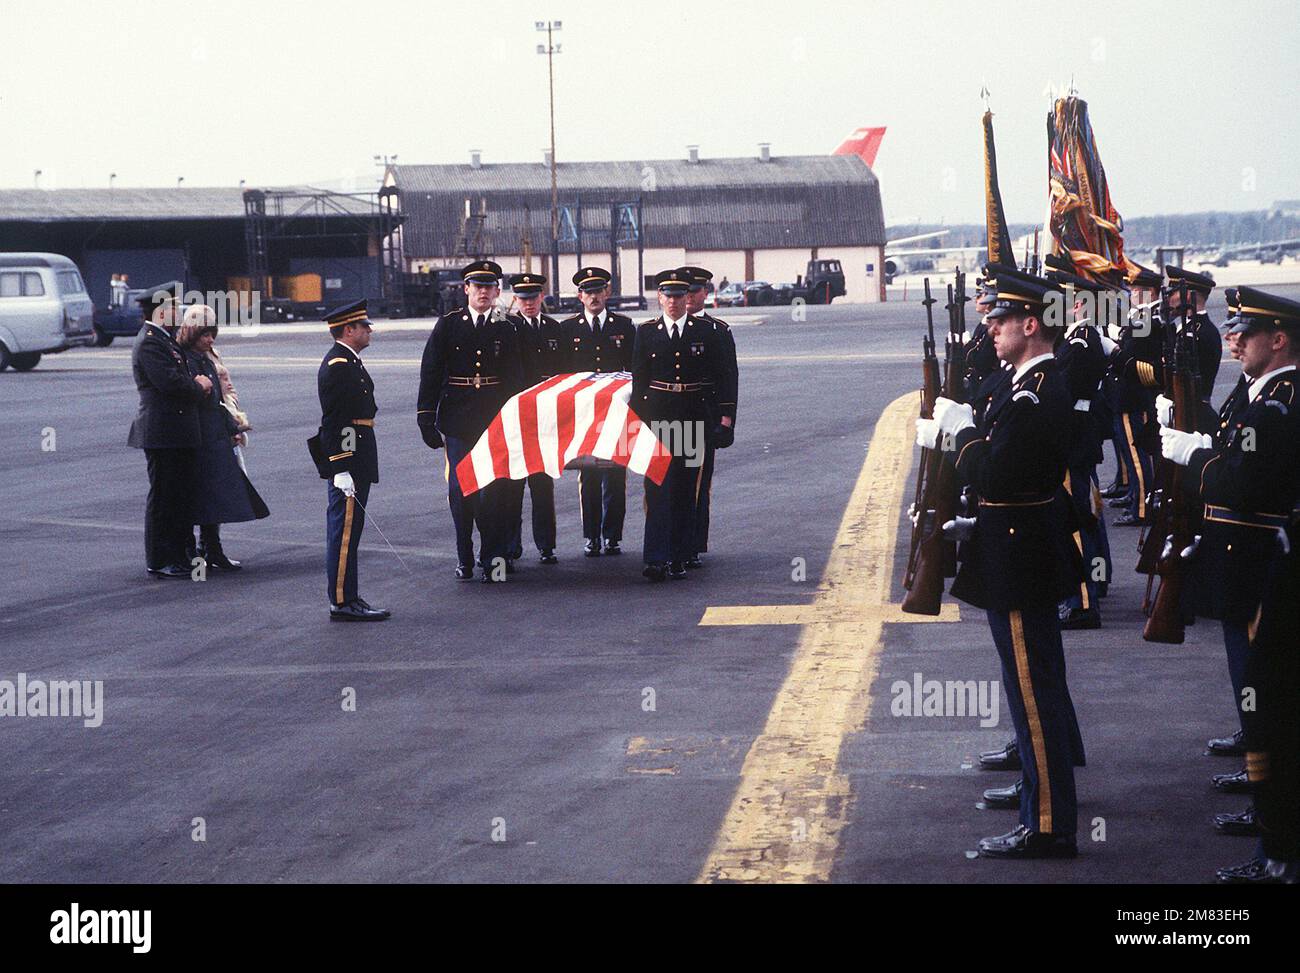 Members of a U.S. Army honor guard and color guard stand at attention as pallbearers carry the casket of MAJ. Arthur D. Nicholson Jr. to an aircraft during a departure ceremony in his honor. Nicholson was shot and killed while on duty in East Berlin. Standing on the left are his widow, Karyn, and daughter Jennifer. Base: Rhein-Main Air Base Country: Deutschland / Germany (DEU) Stock Photo